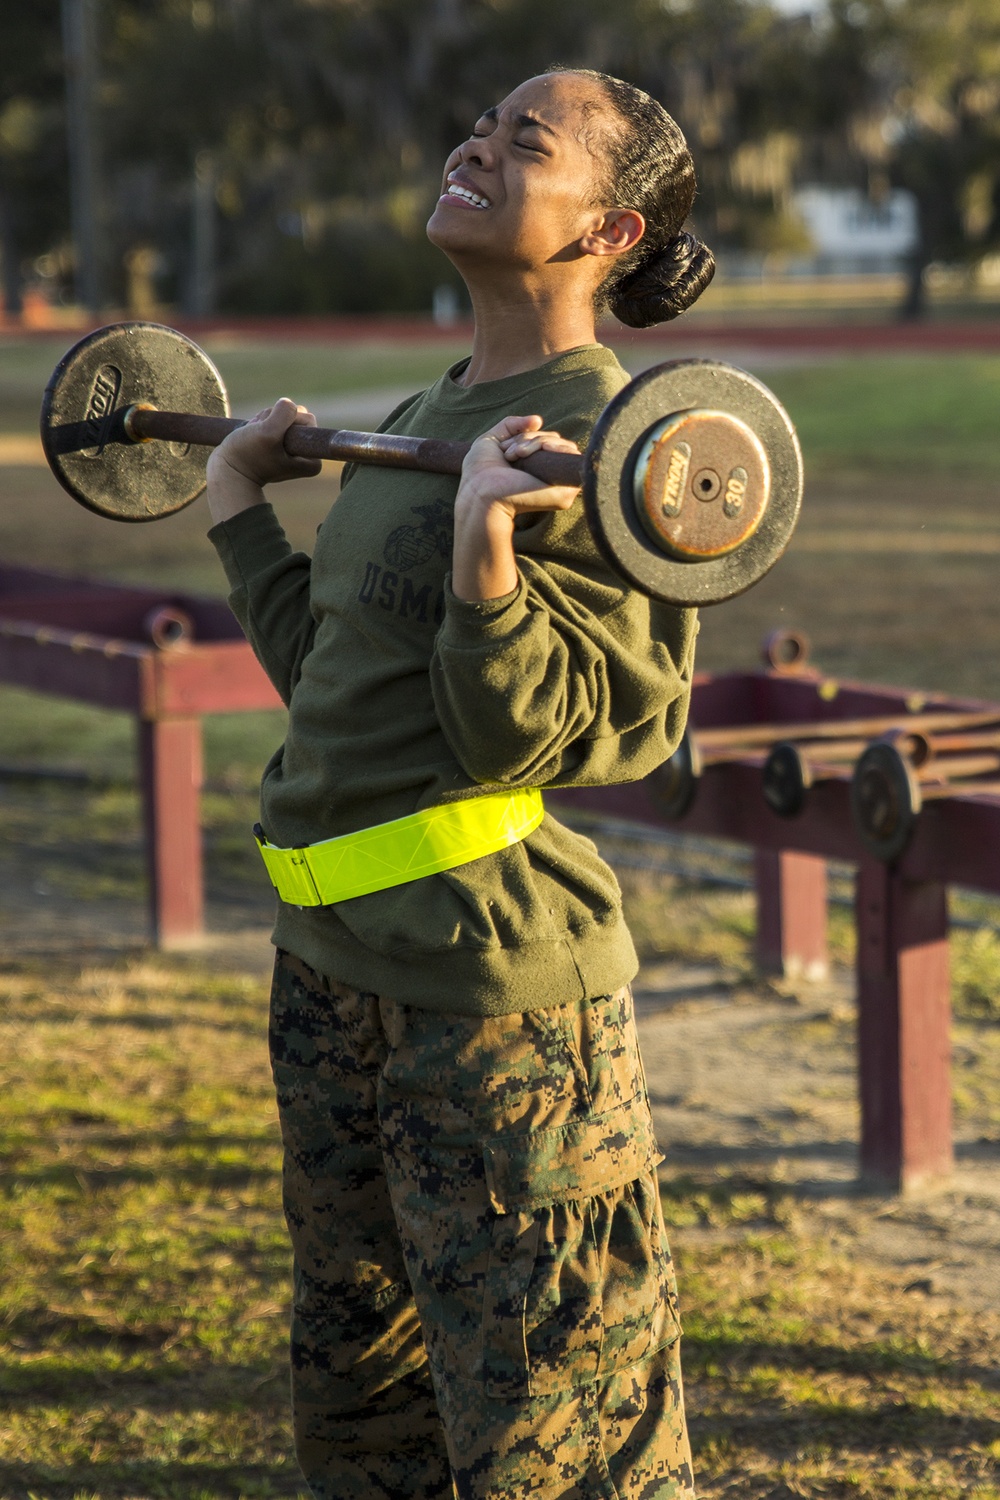 Parris Island recruits train for Marine Corps’ high fitness standards